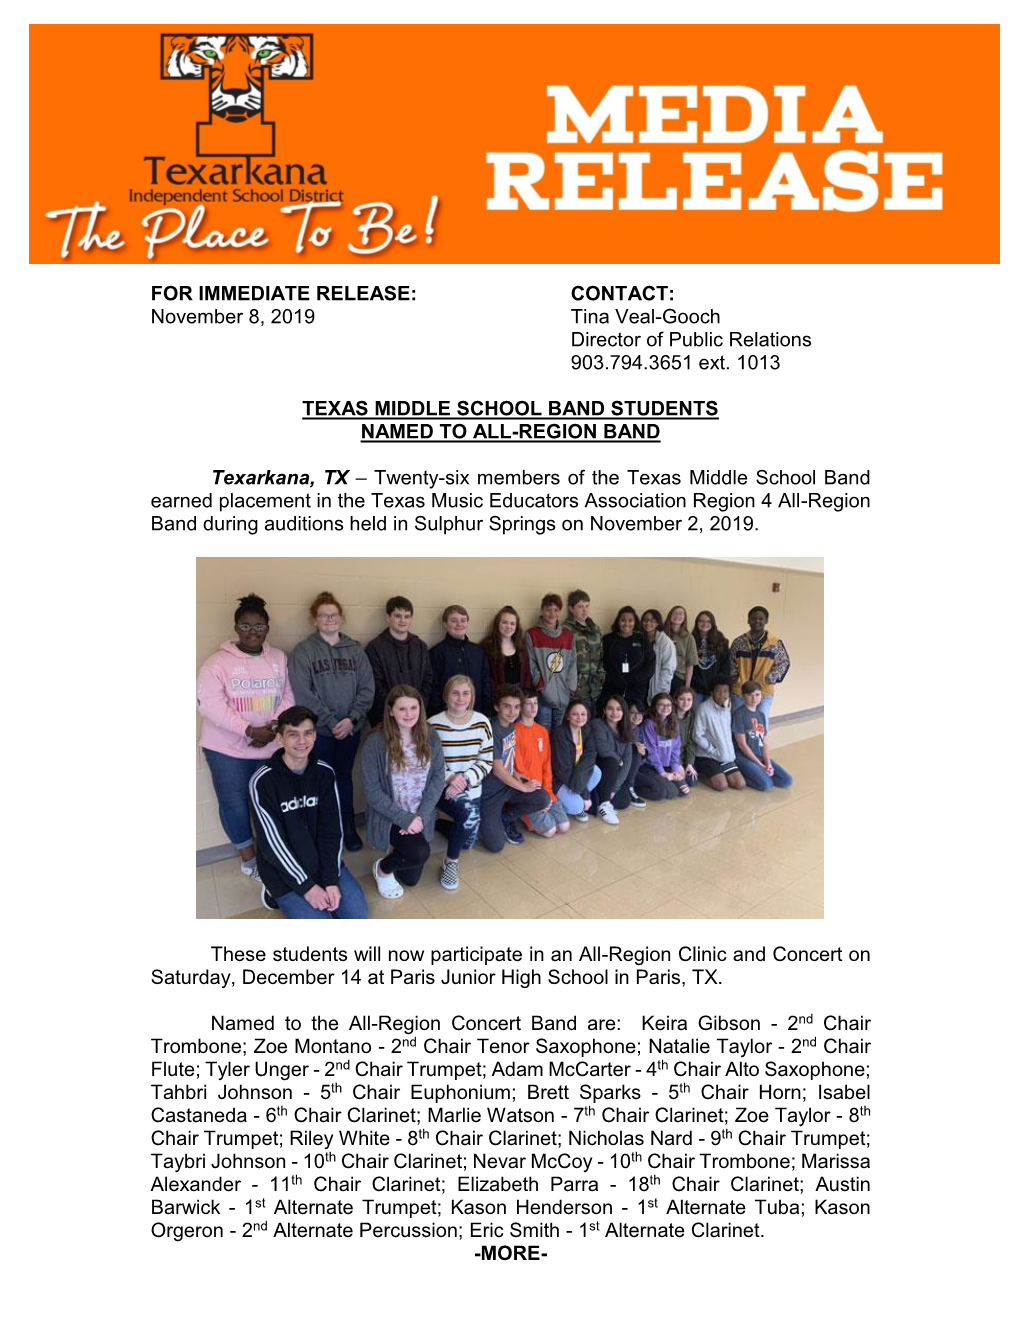 FOR IMMEDIATE RELEASE: CONTACT: November 8, 2019 Tina Veal-Gooch Director of Public Relations 903.794.3651 Ext